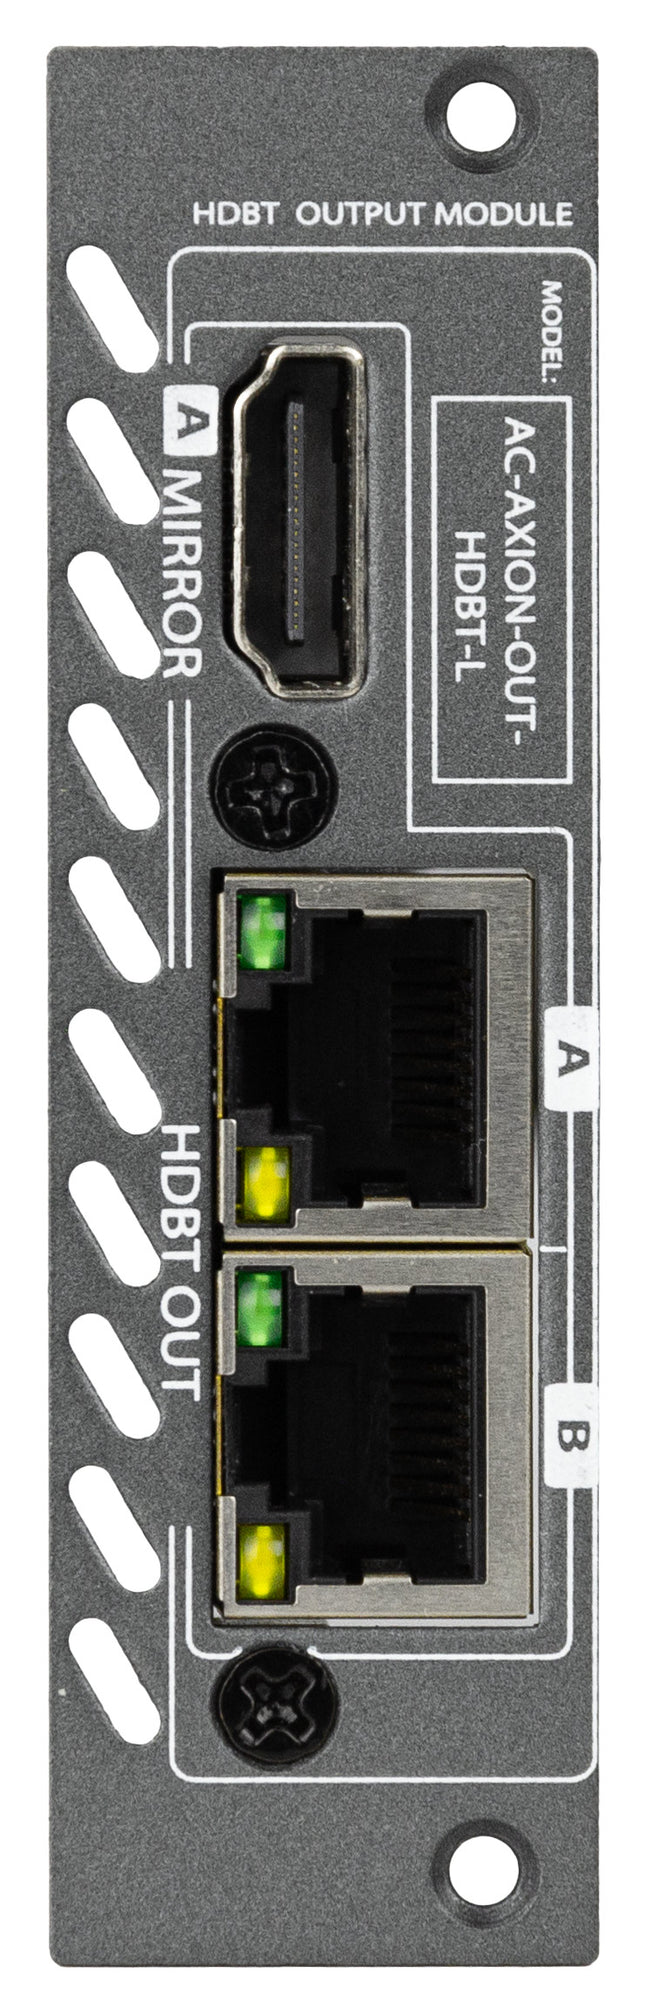 AXION HDBaseT Output Card with Limited Features